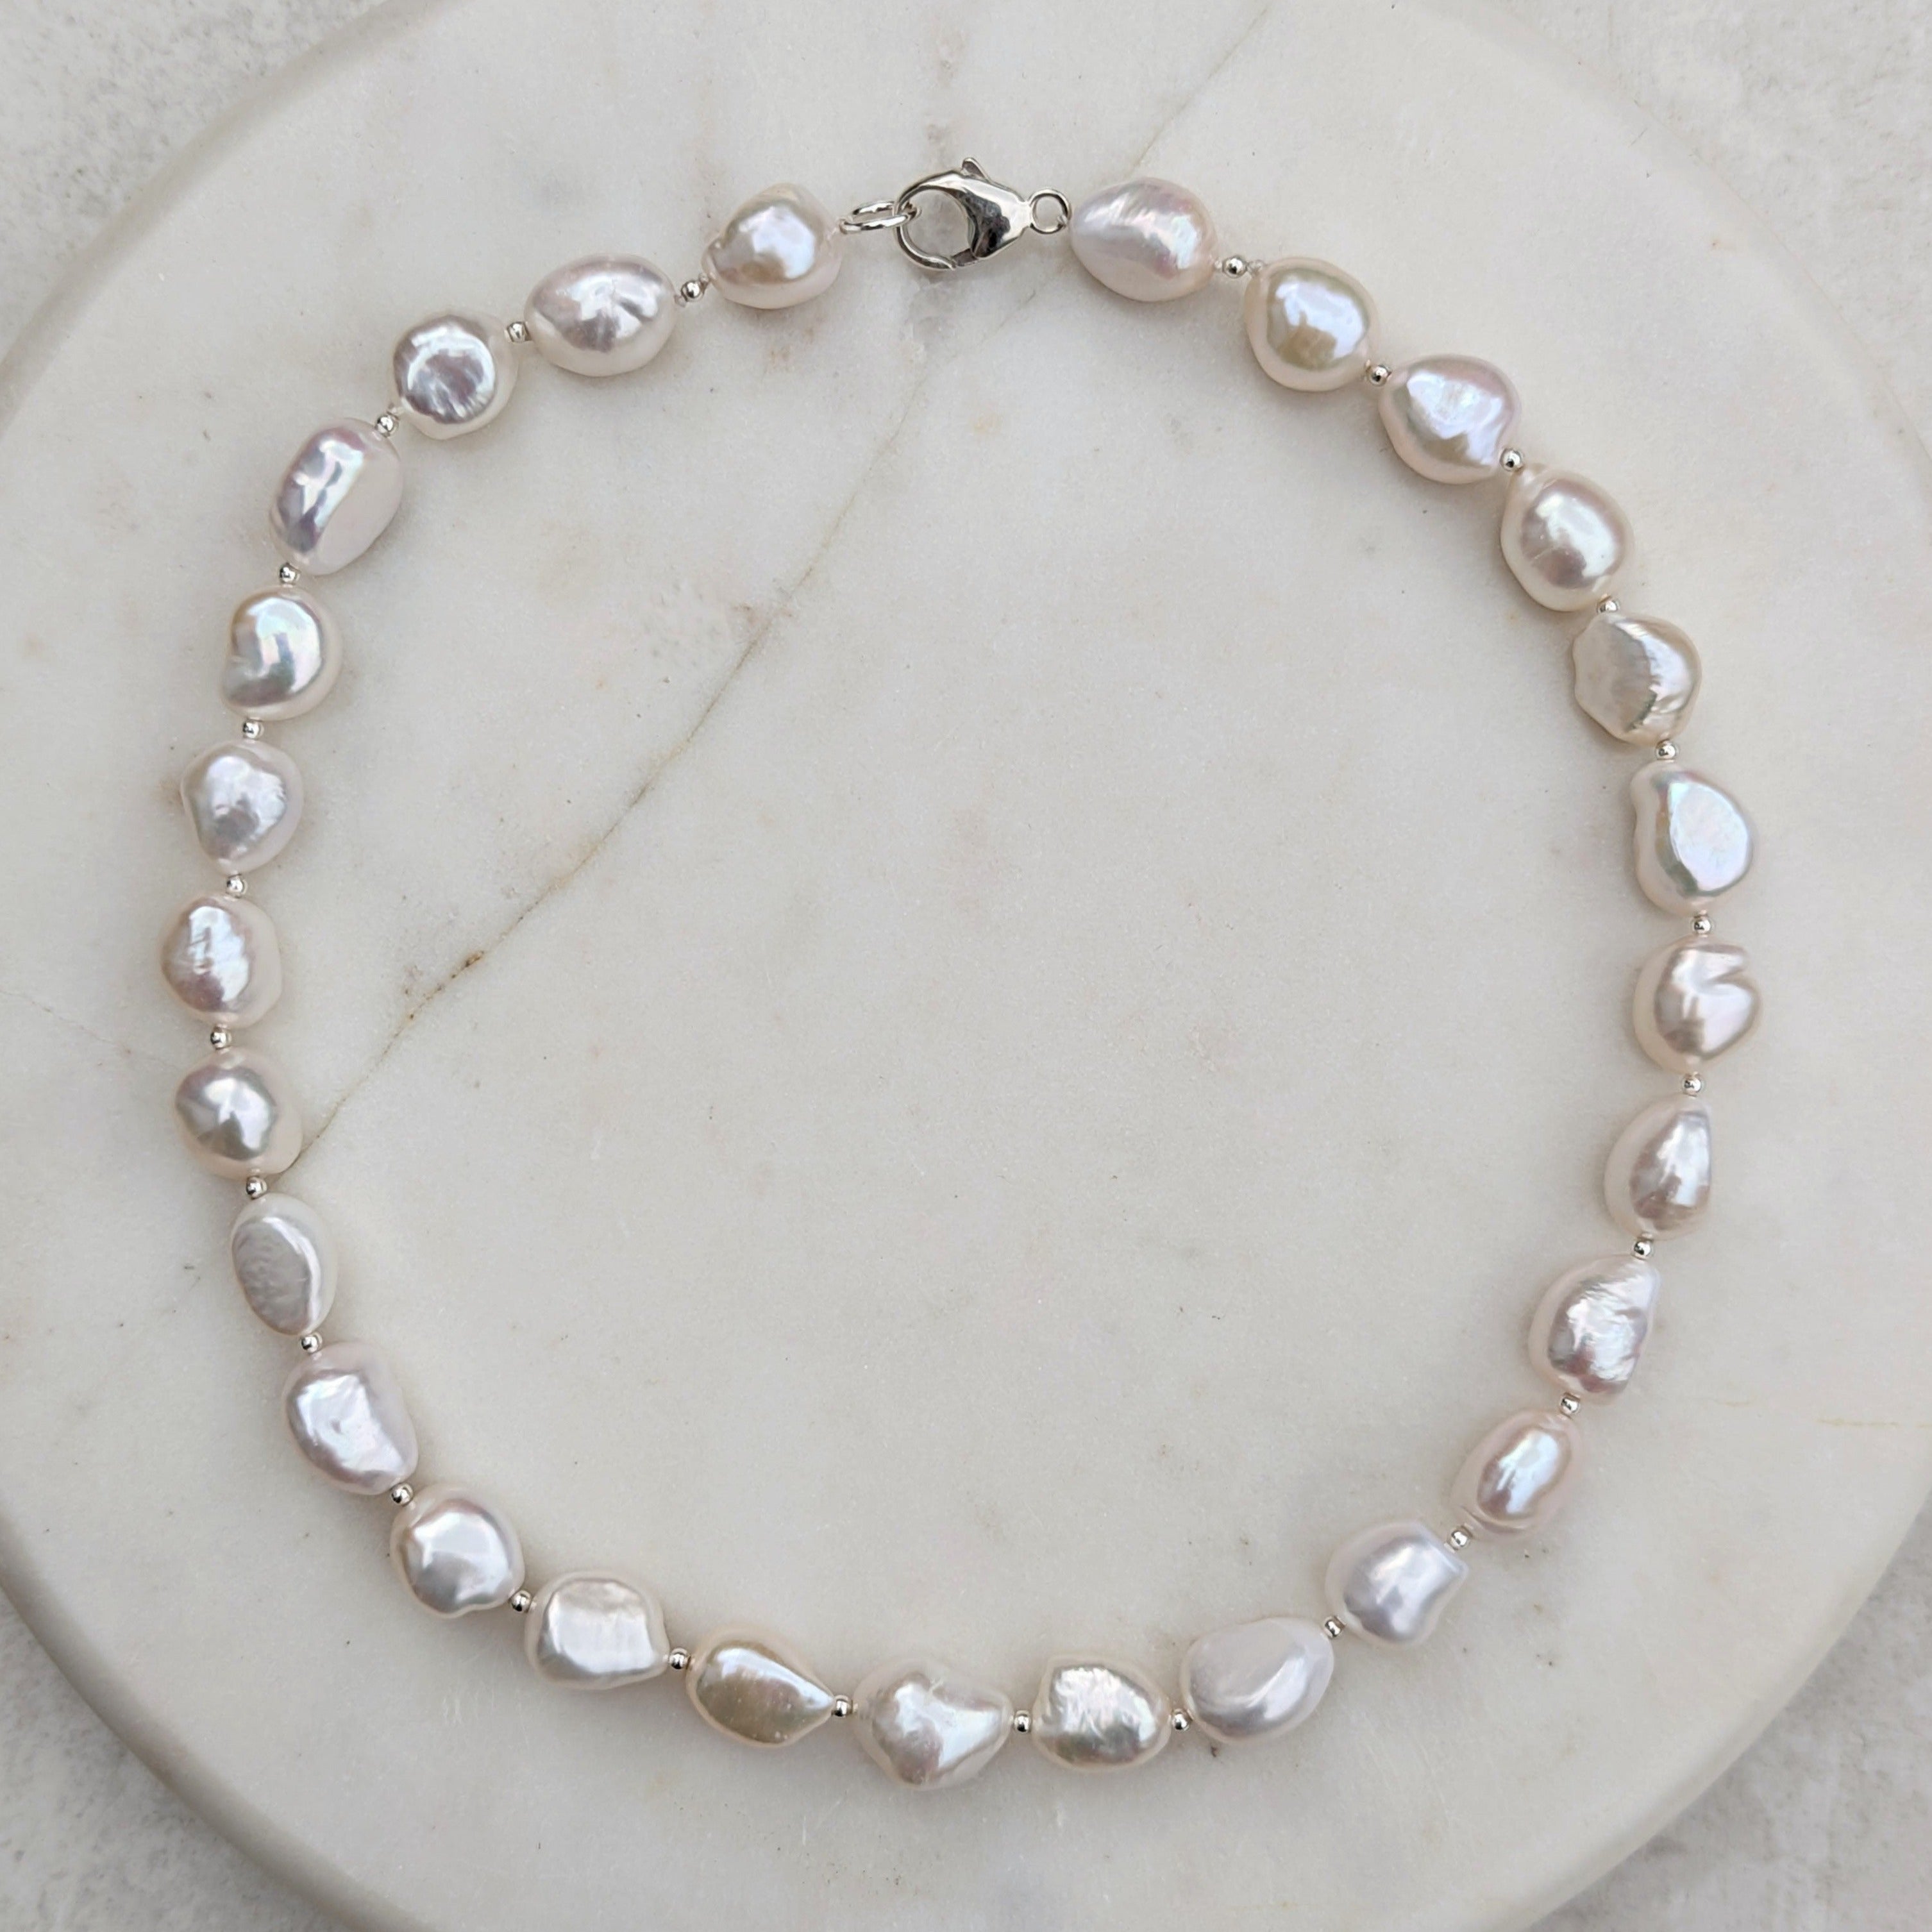 Chunky pearl necklace with silver beads and clasp